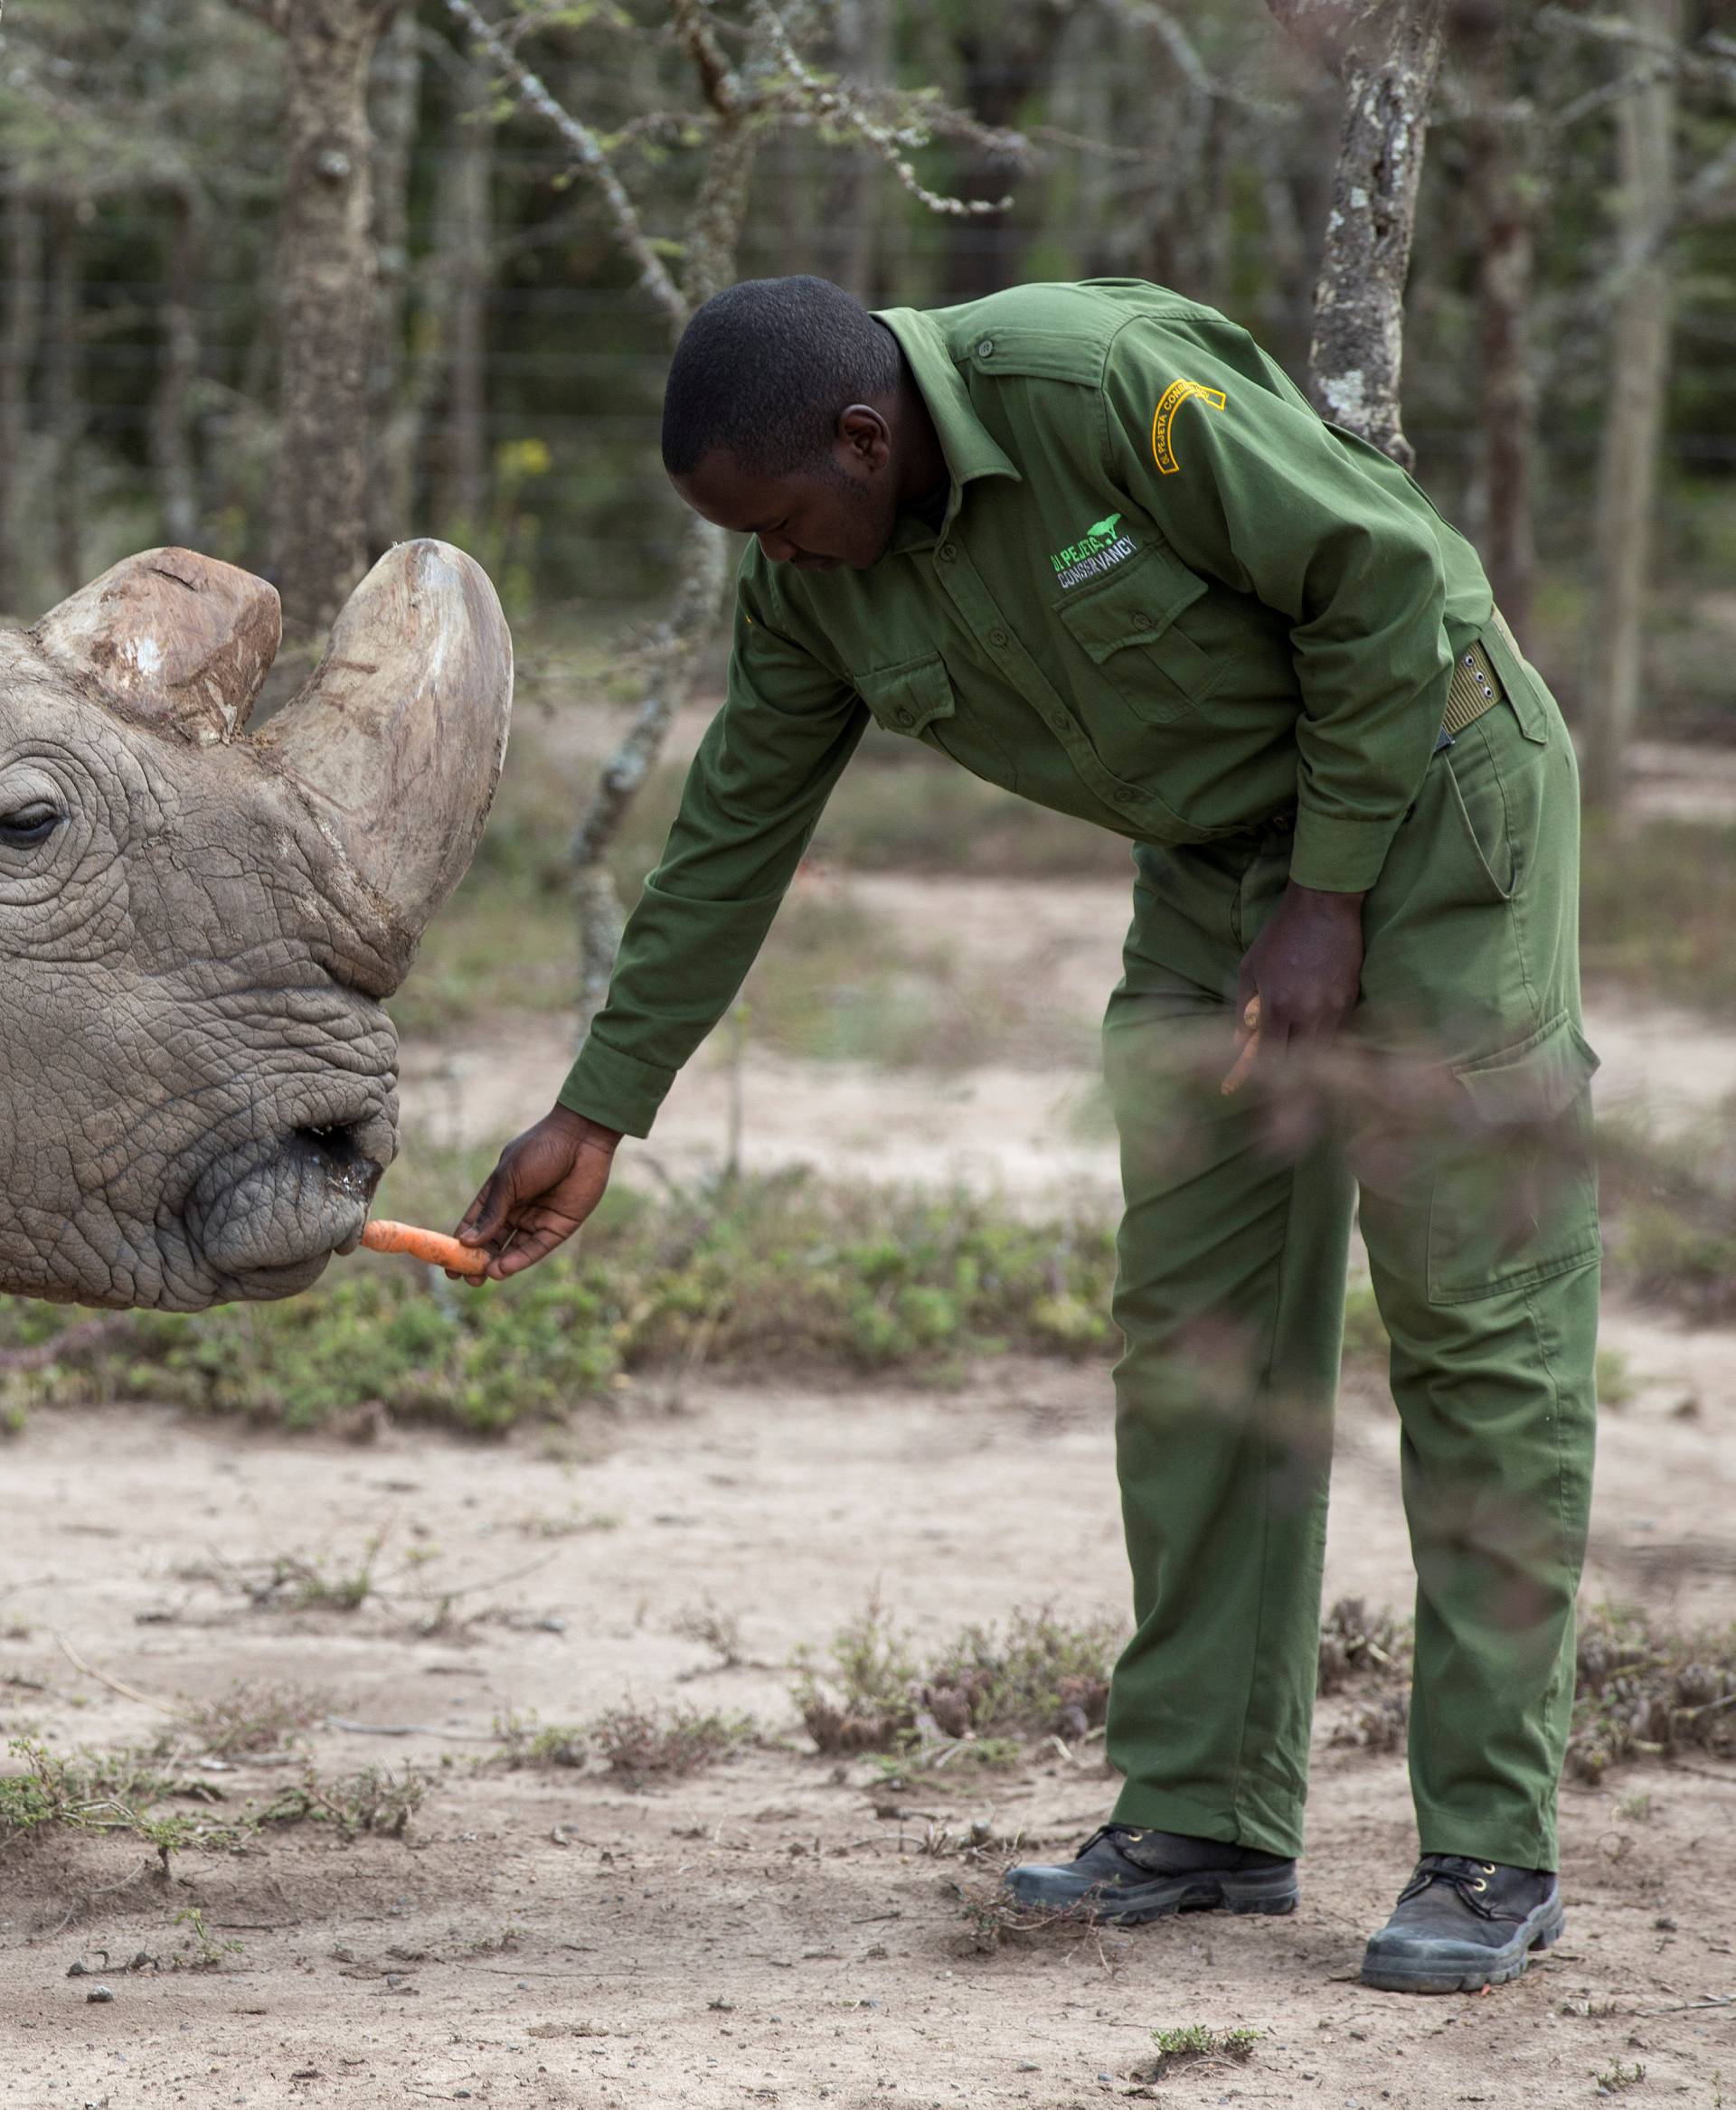 FILE PHOTO: Sudan, the last surviving male northern white rhino, is fed by a warden at the Ol Pejeta Conservancy in Laikipia national park